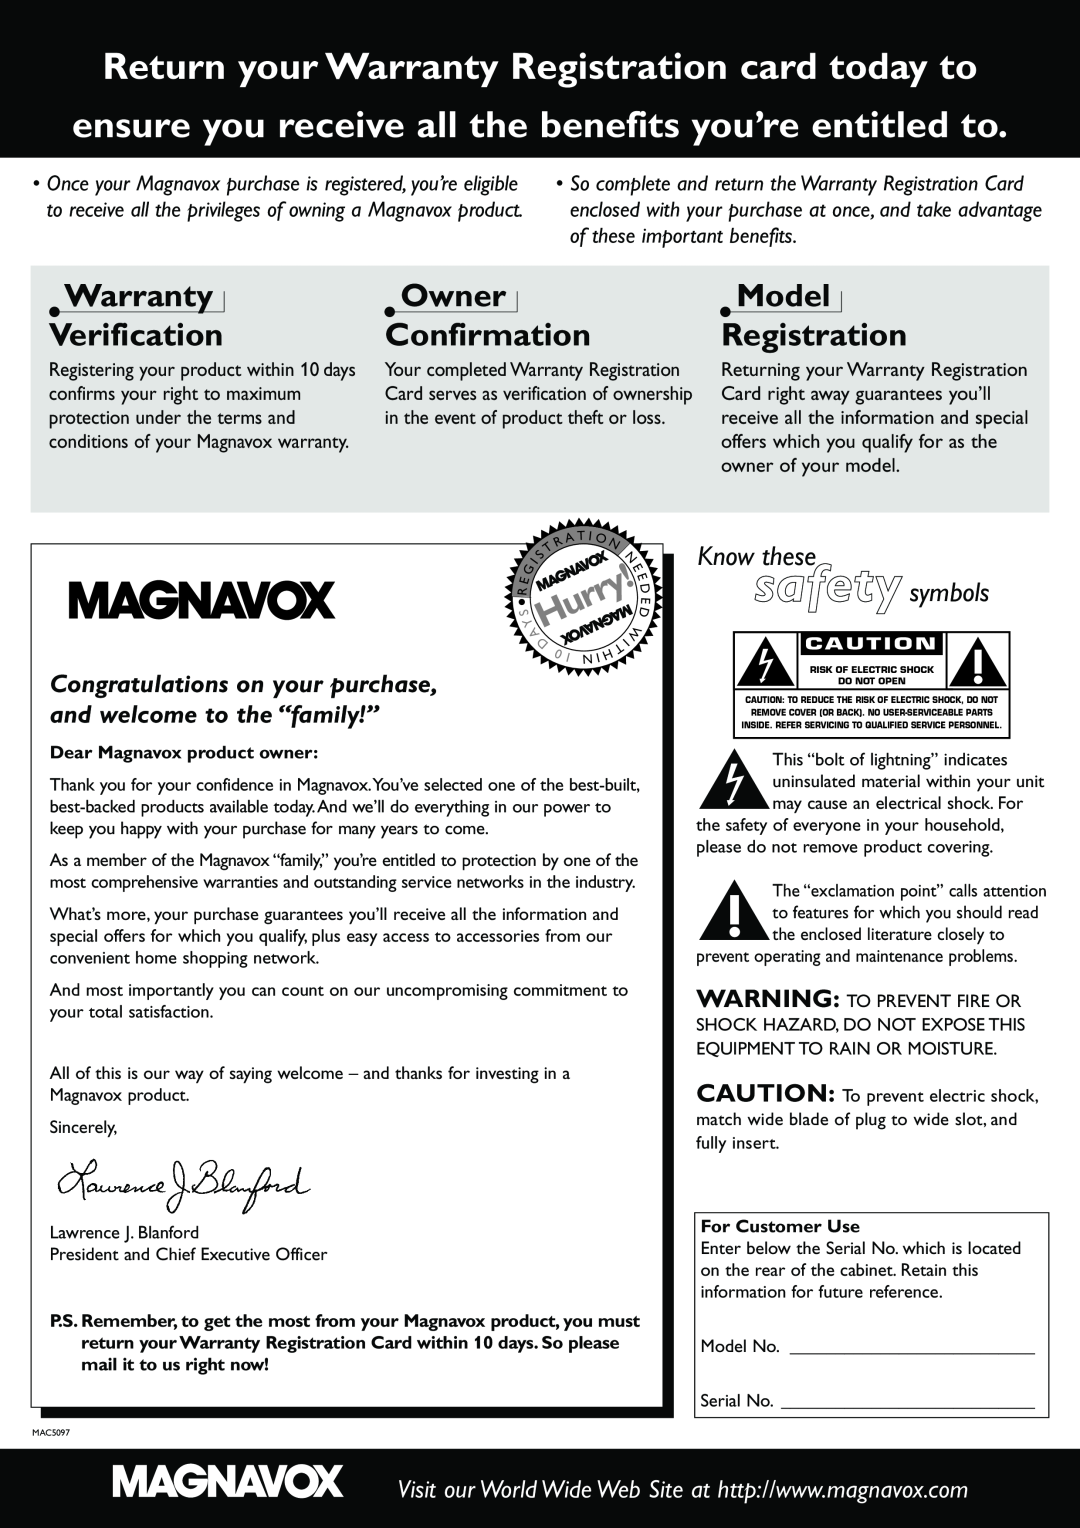 Magnavox MRD300 Return your Warranty Registration card today to, Warranty Verification, Owner Confirmation, Hurry 